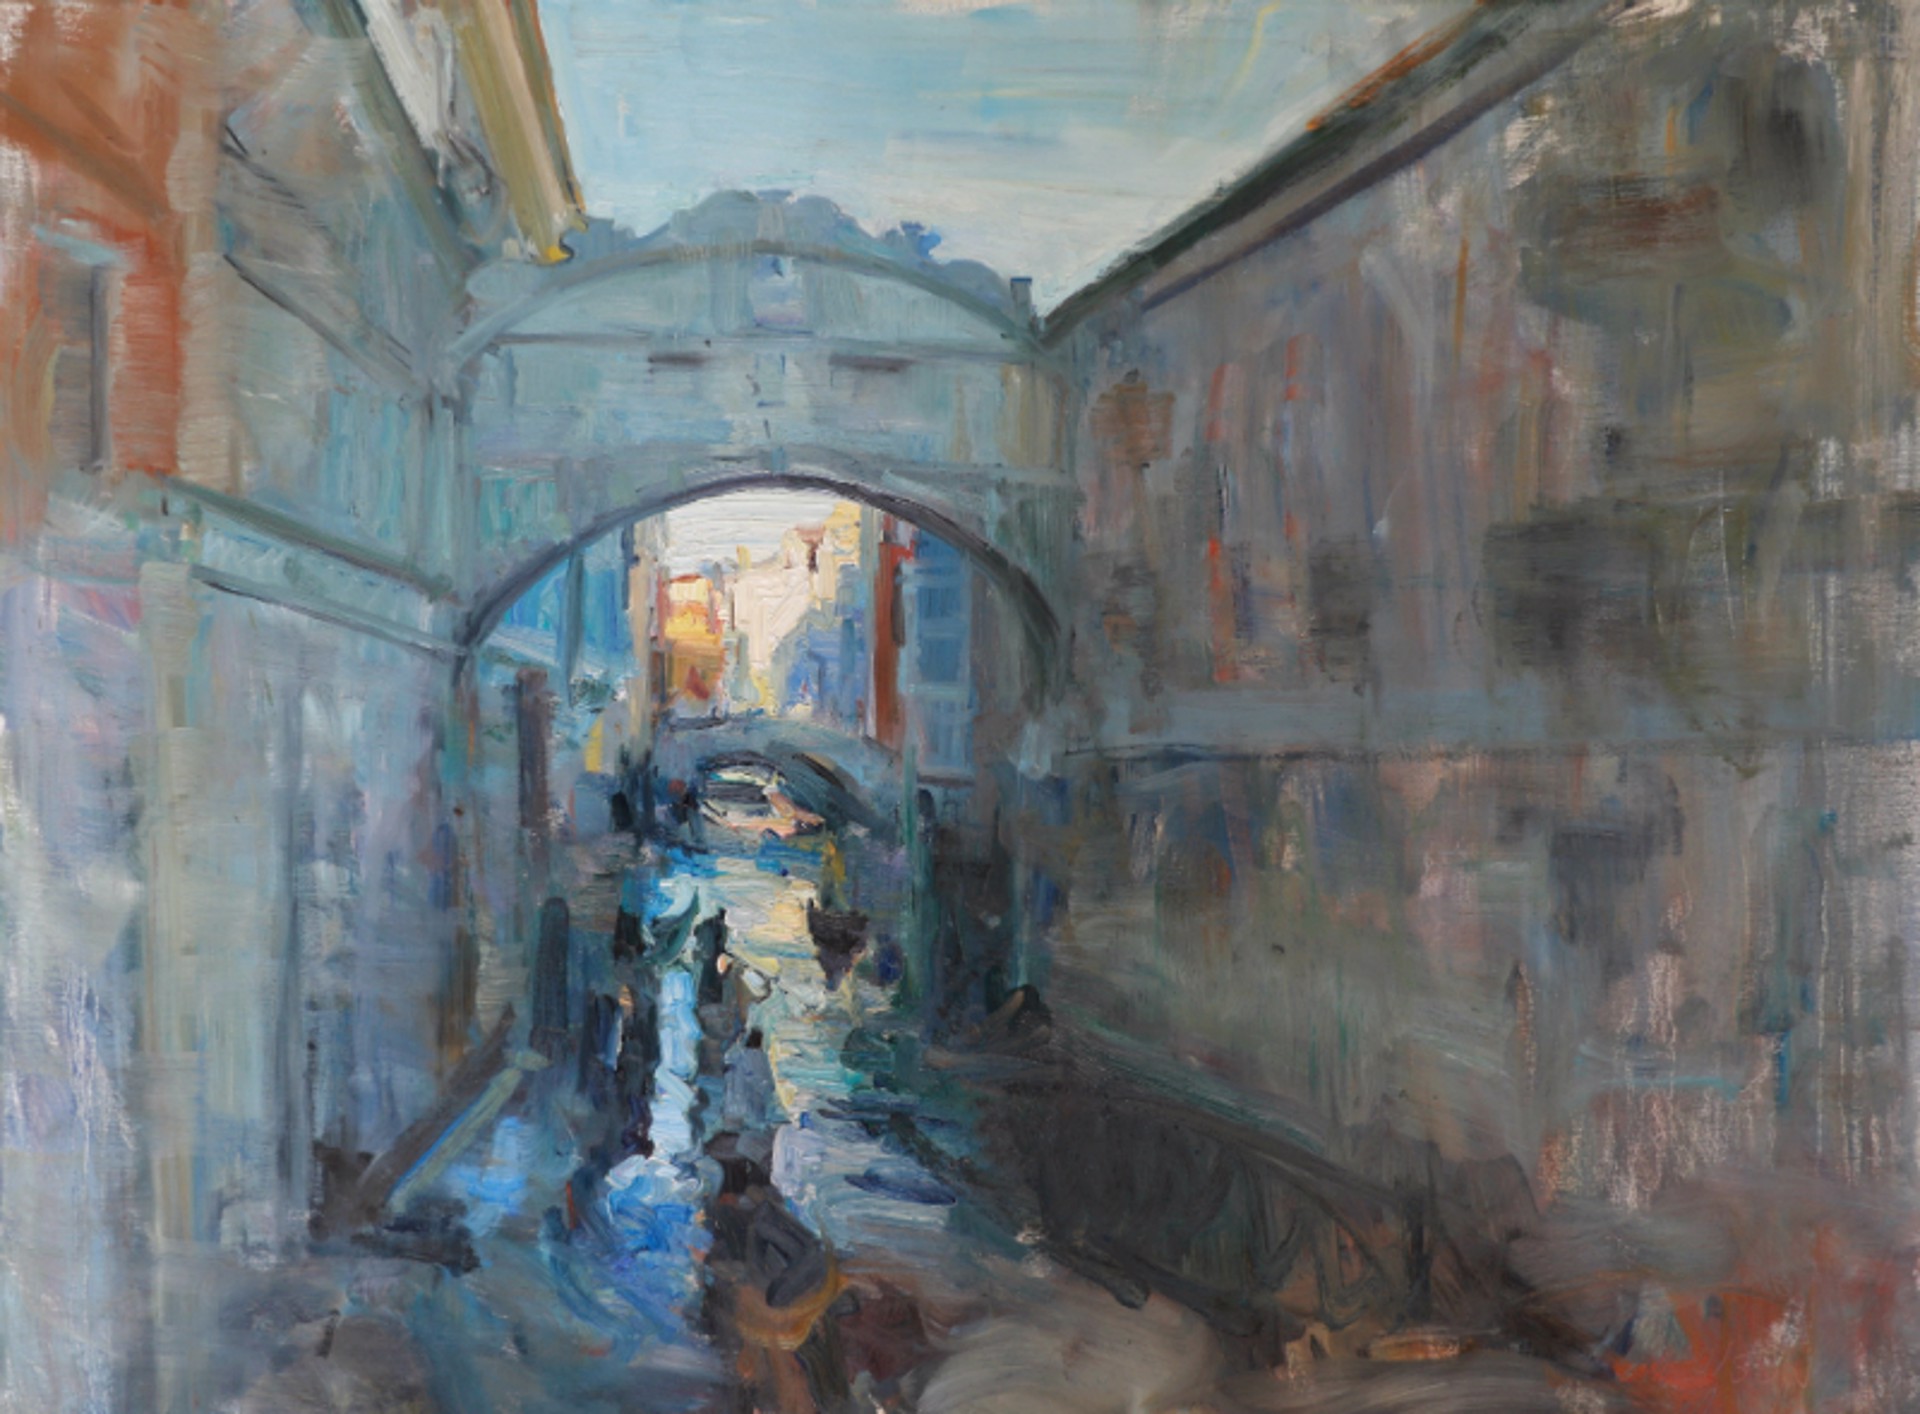 The Bridge of Sighs by Mikael Olson